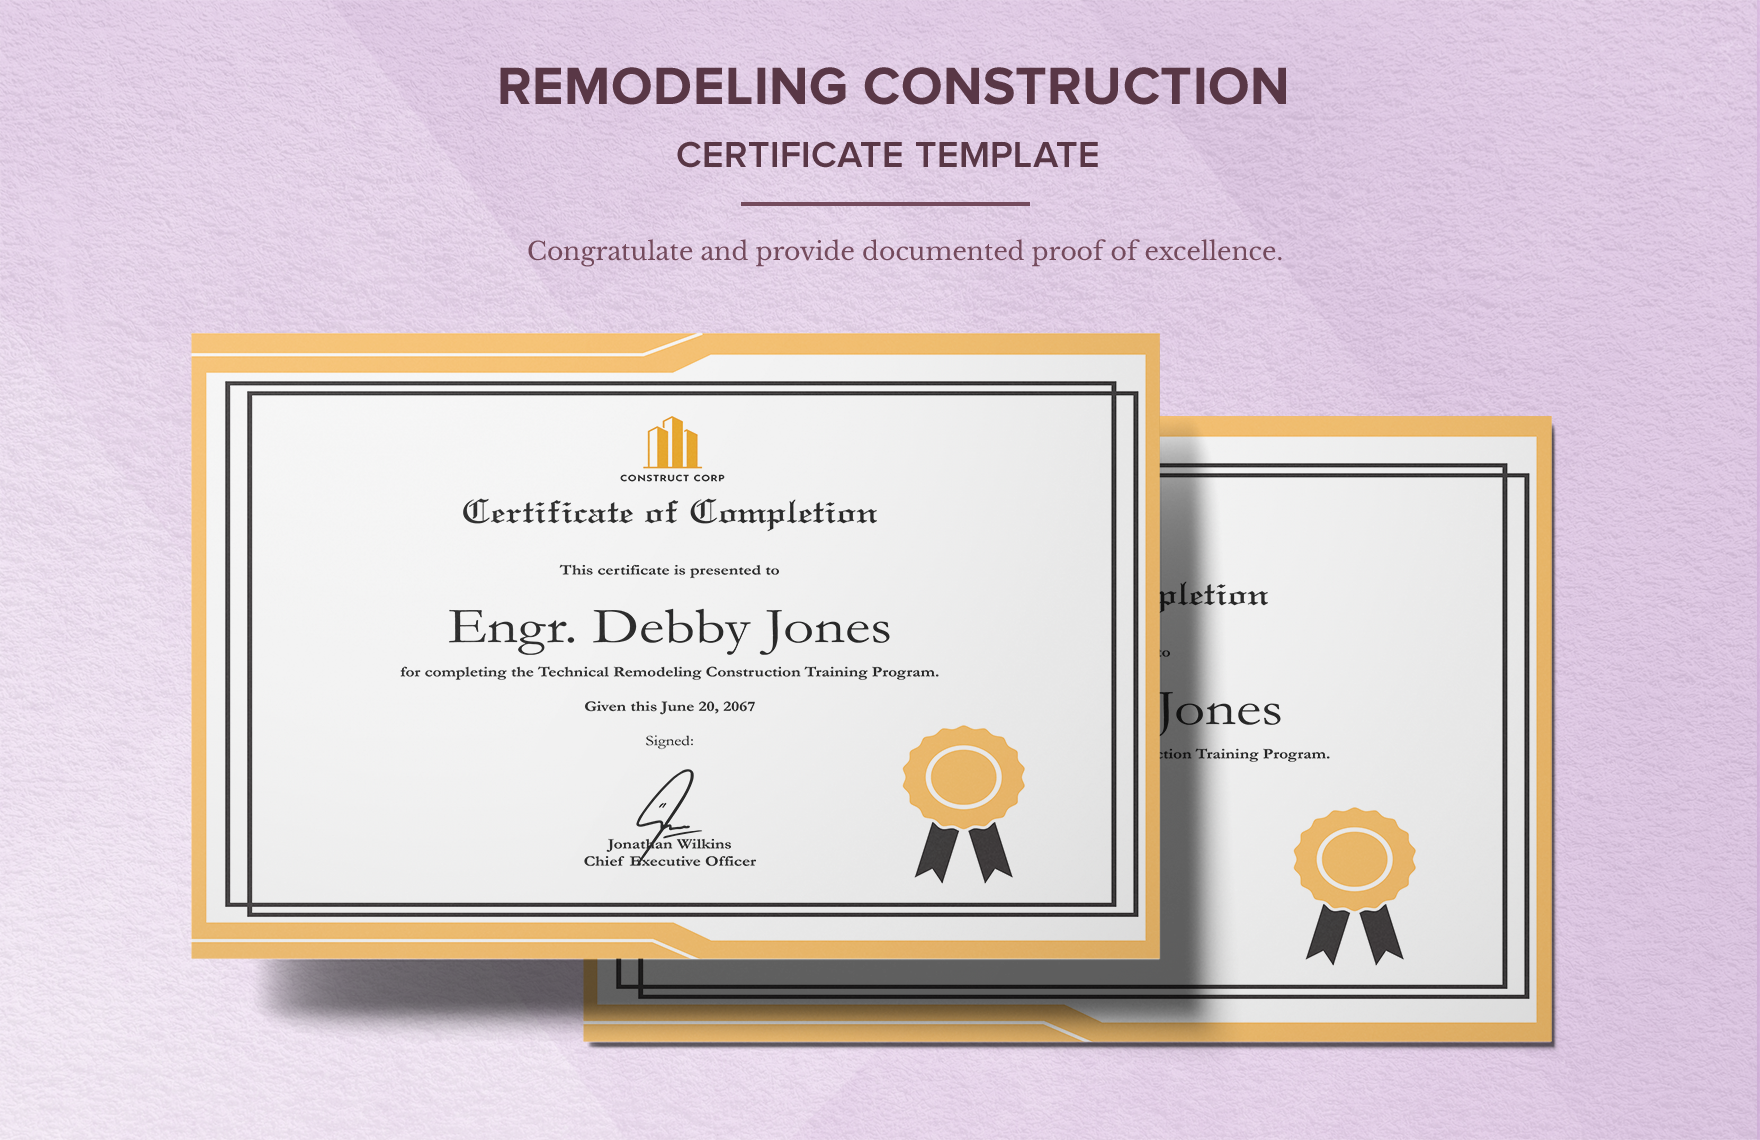 Remodeling Construction Certificate Template